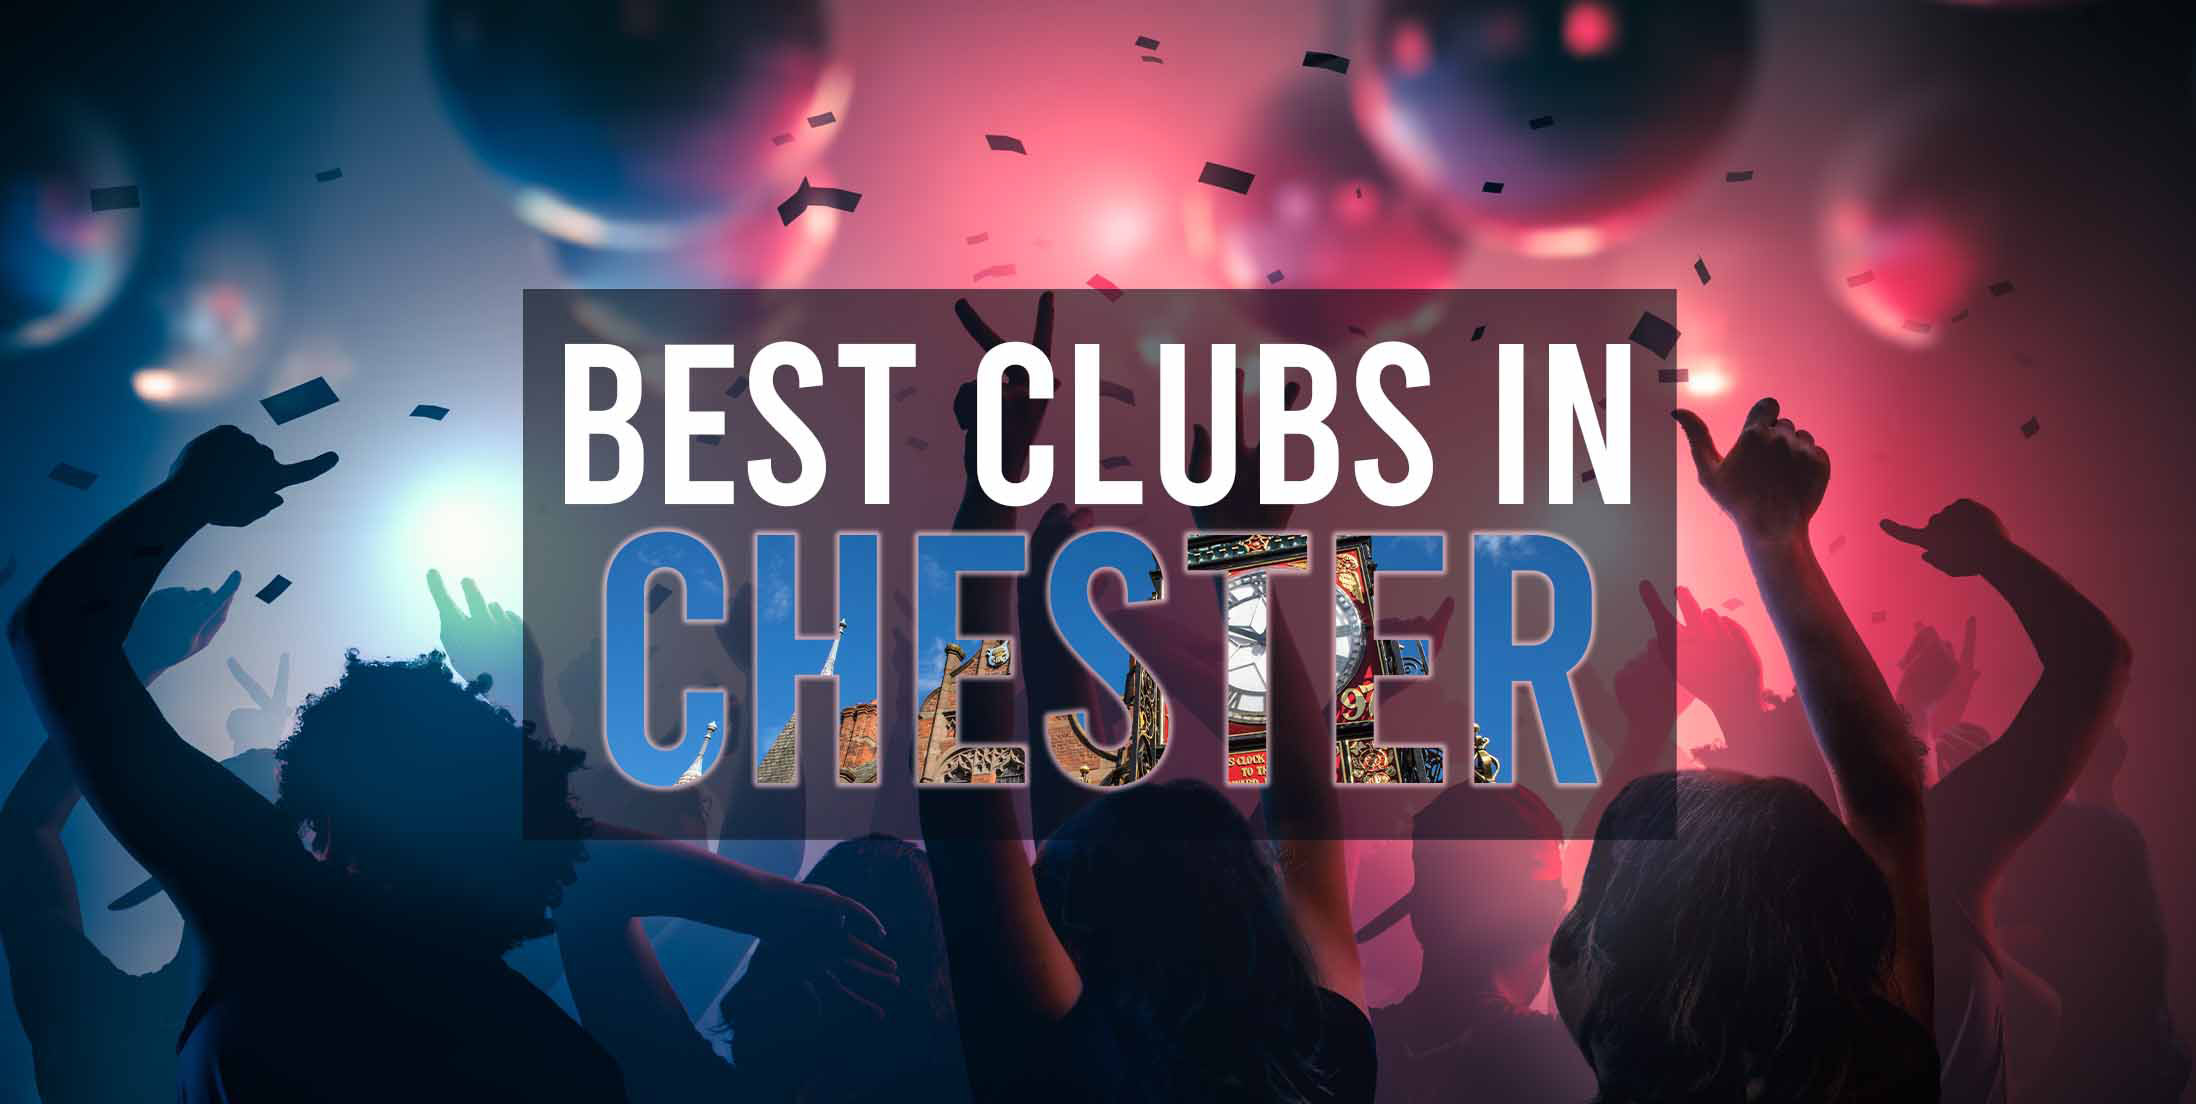 7 Best Clubs in Chester